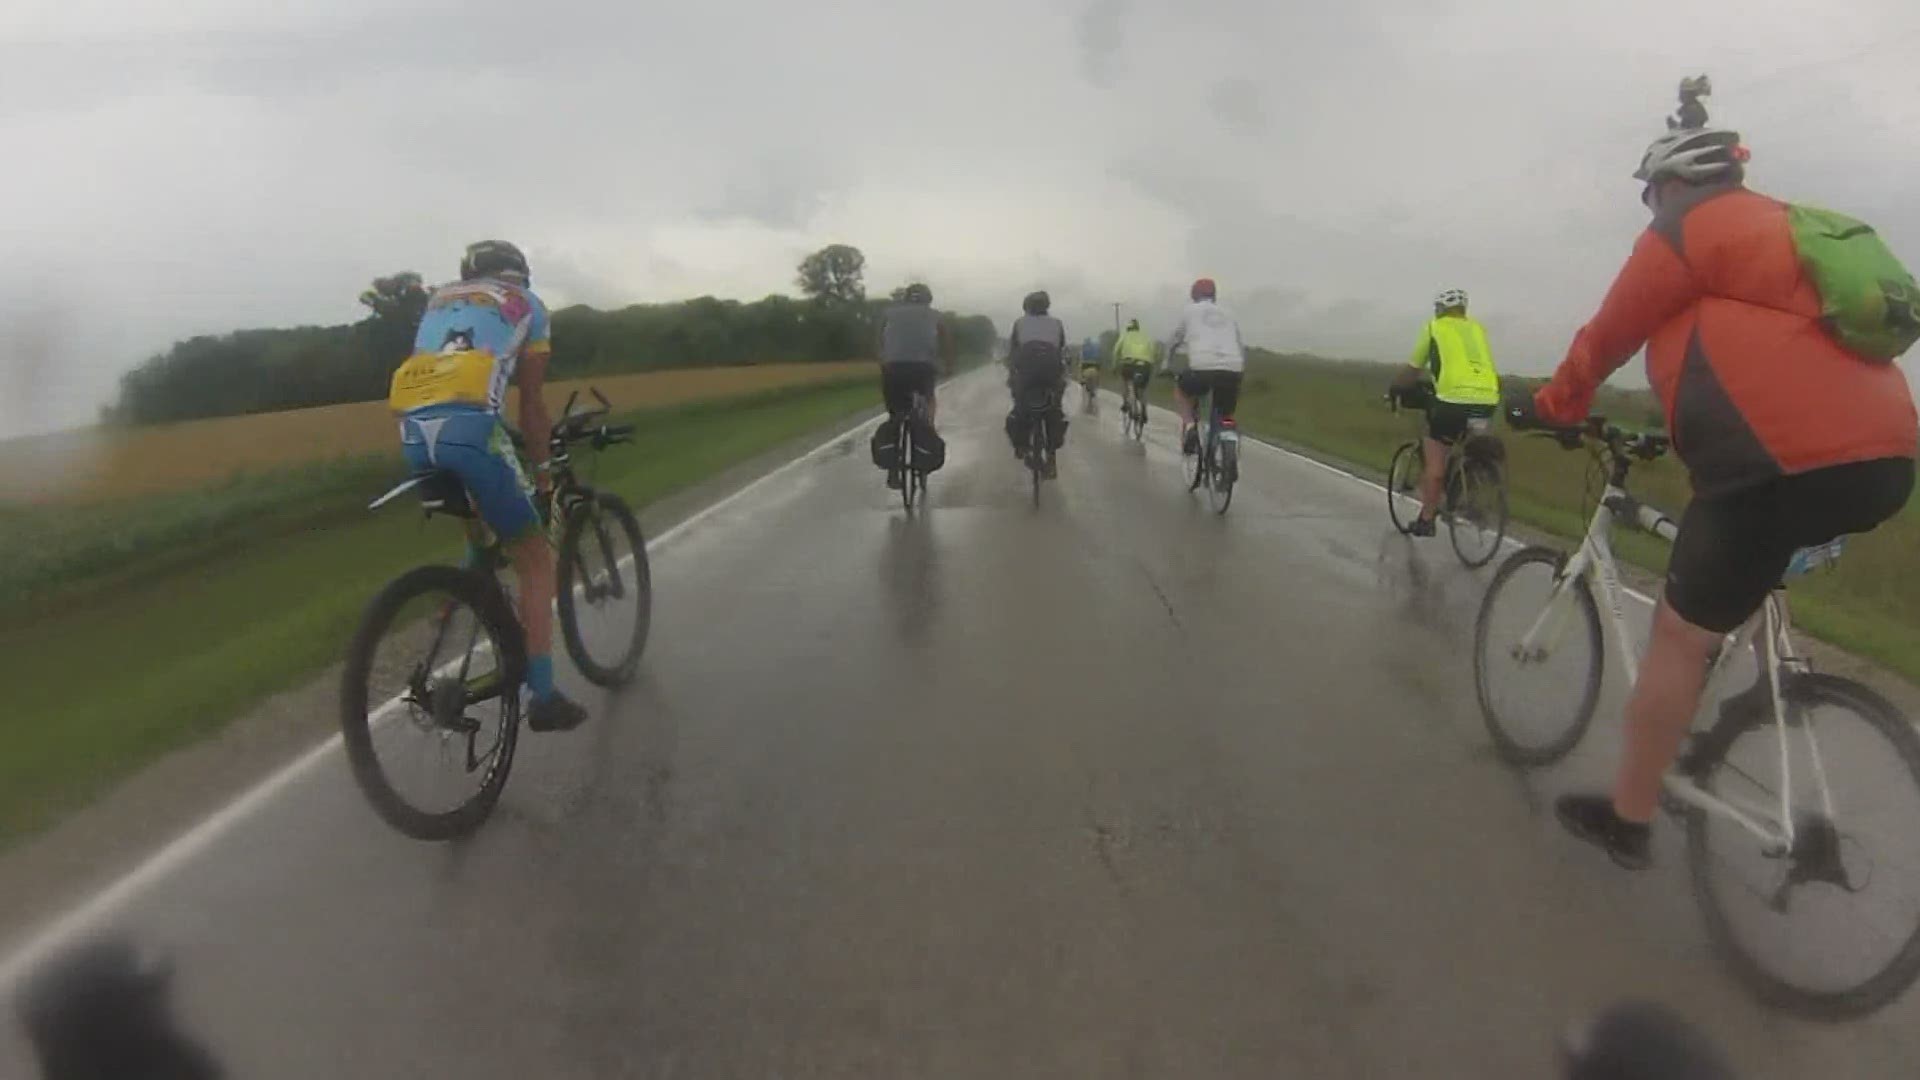 RAGBRAI flashback: A rainy day on the 2017 route